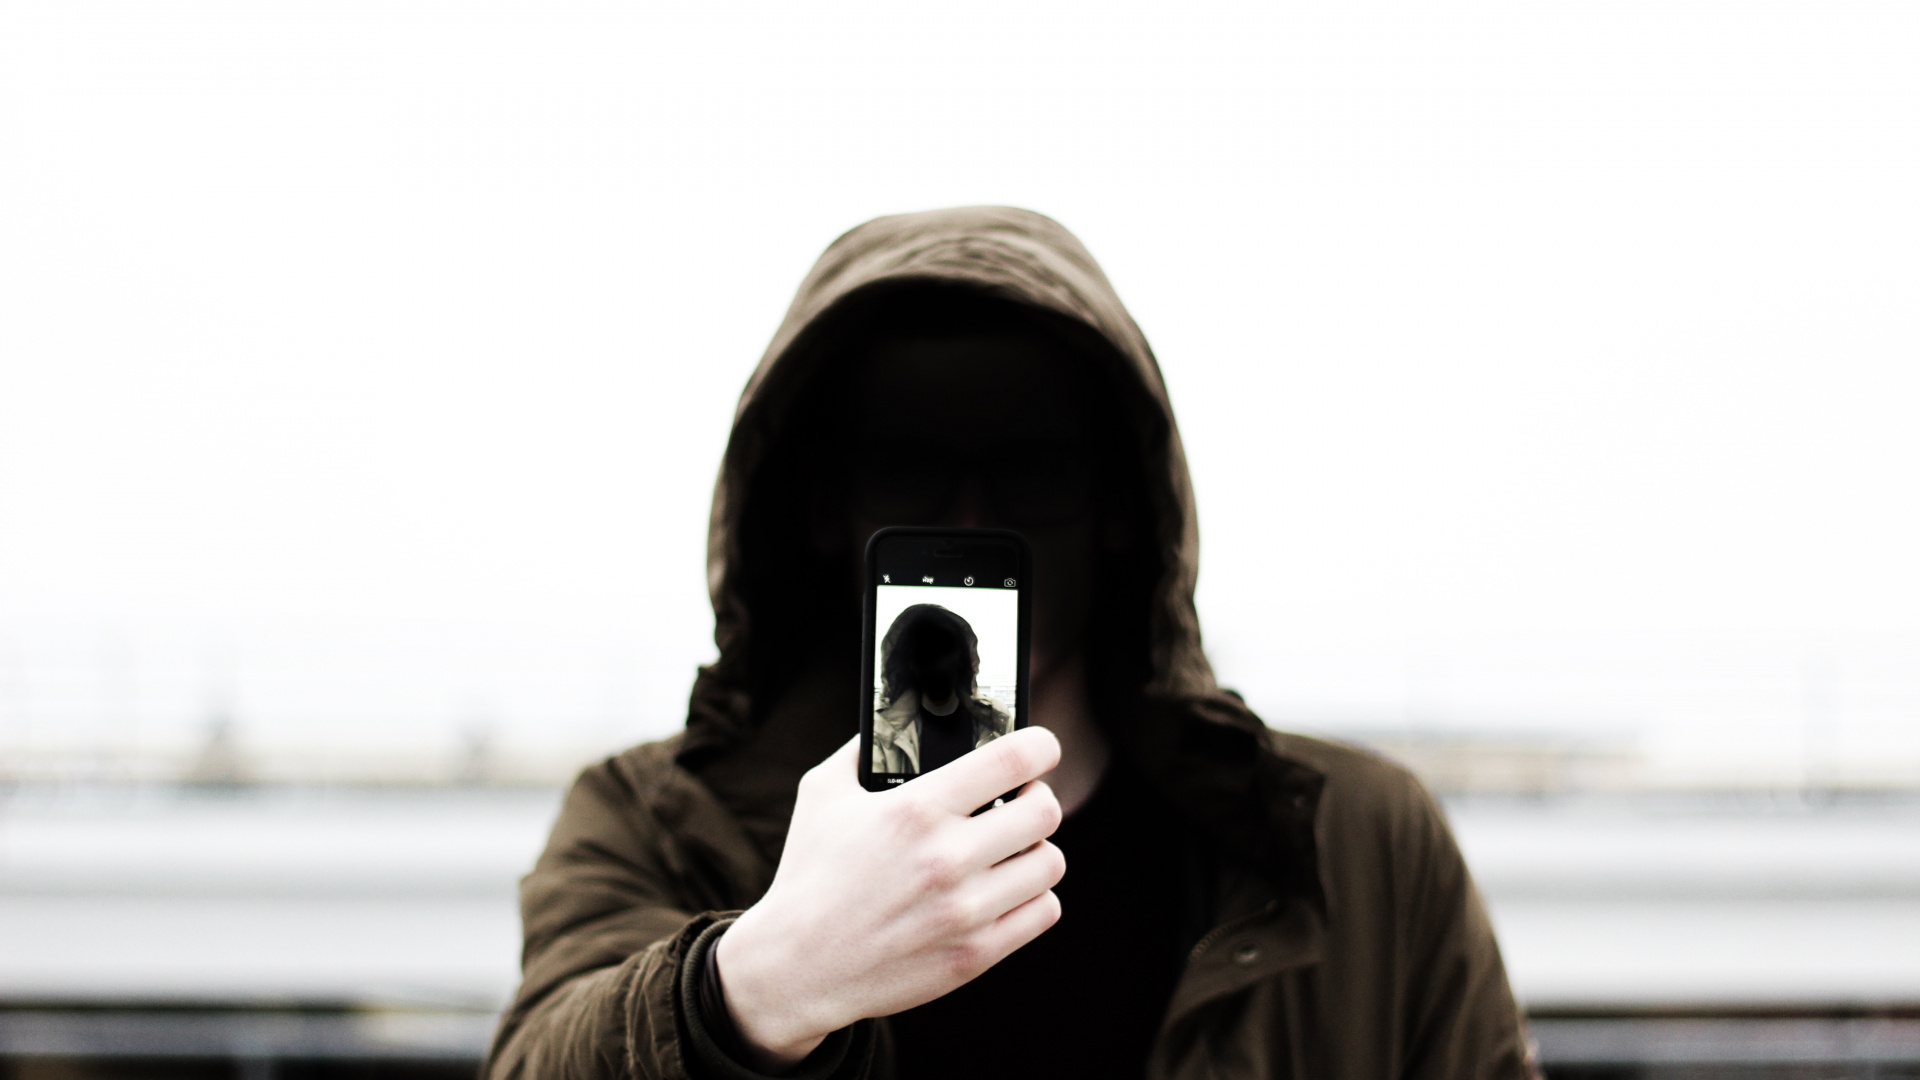 Grayscale Photo of Man in Hoodie Holding Phone. Wallpaper in 1920x1080 Resolution